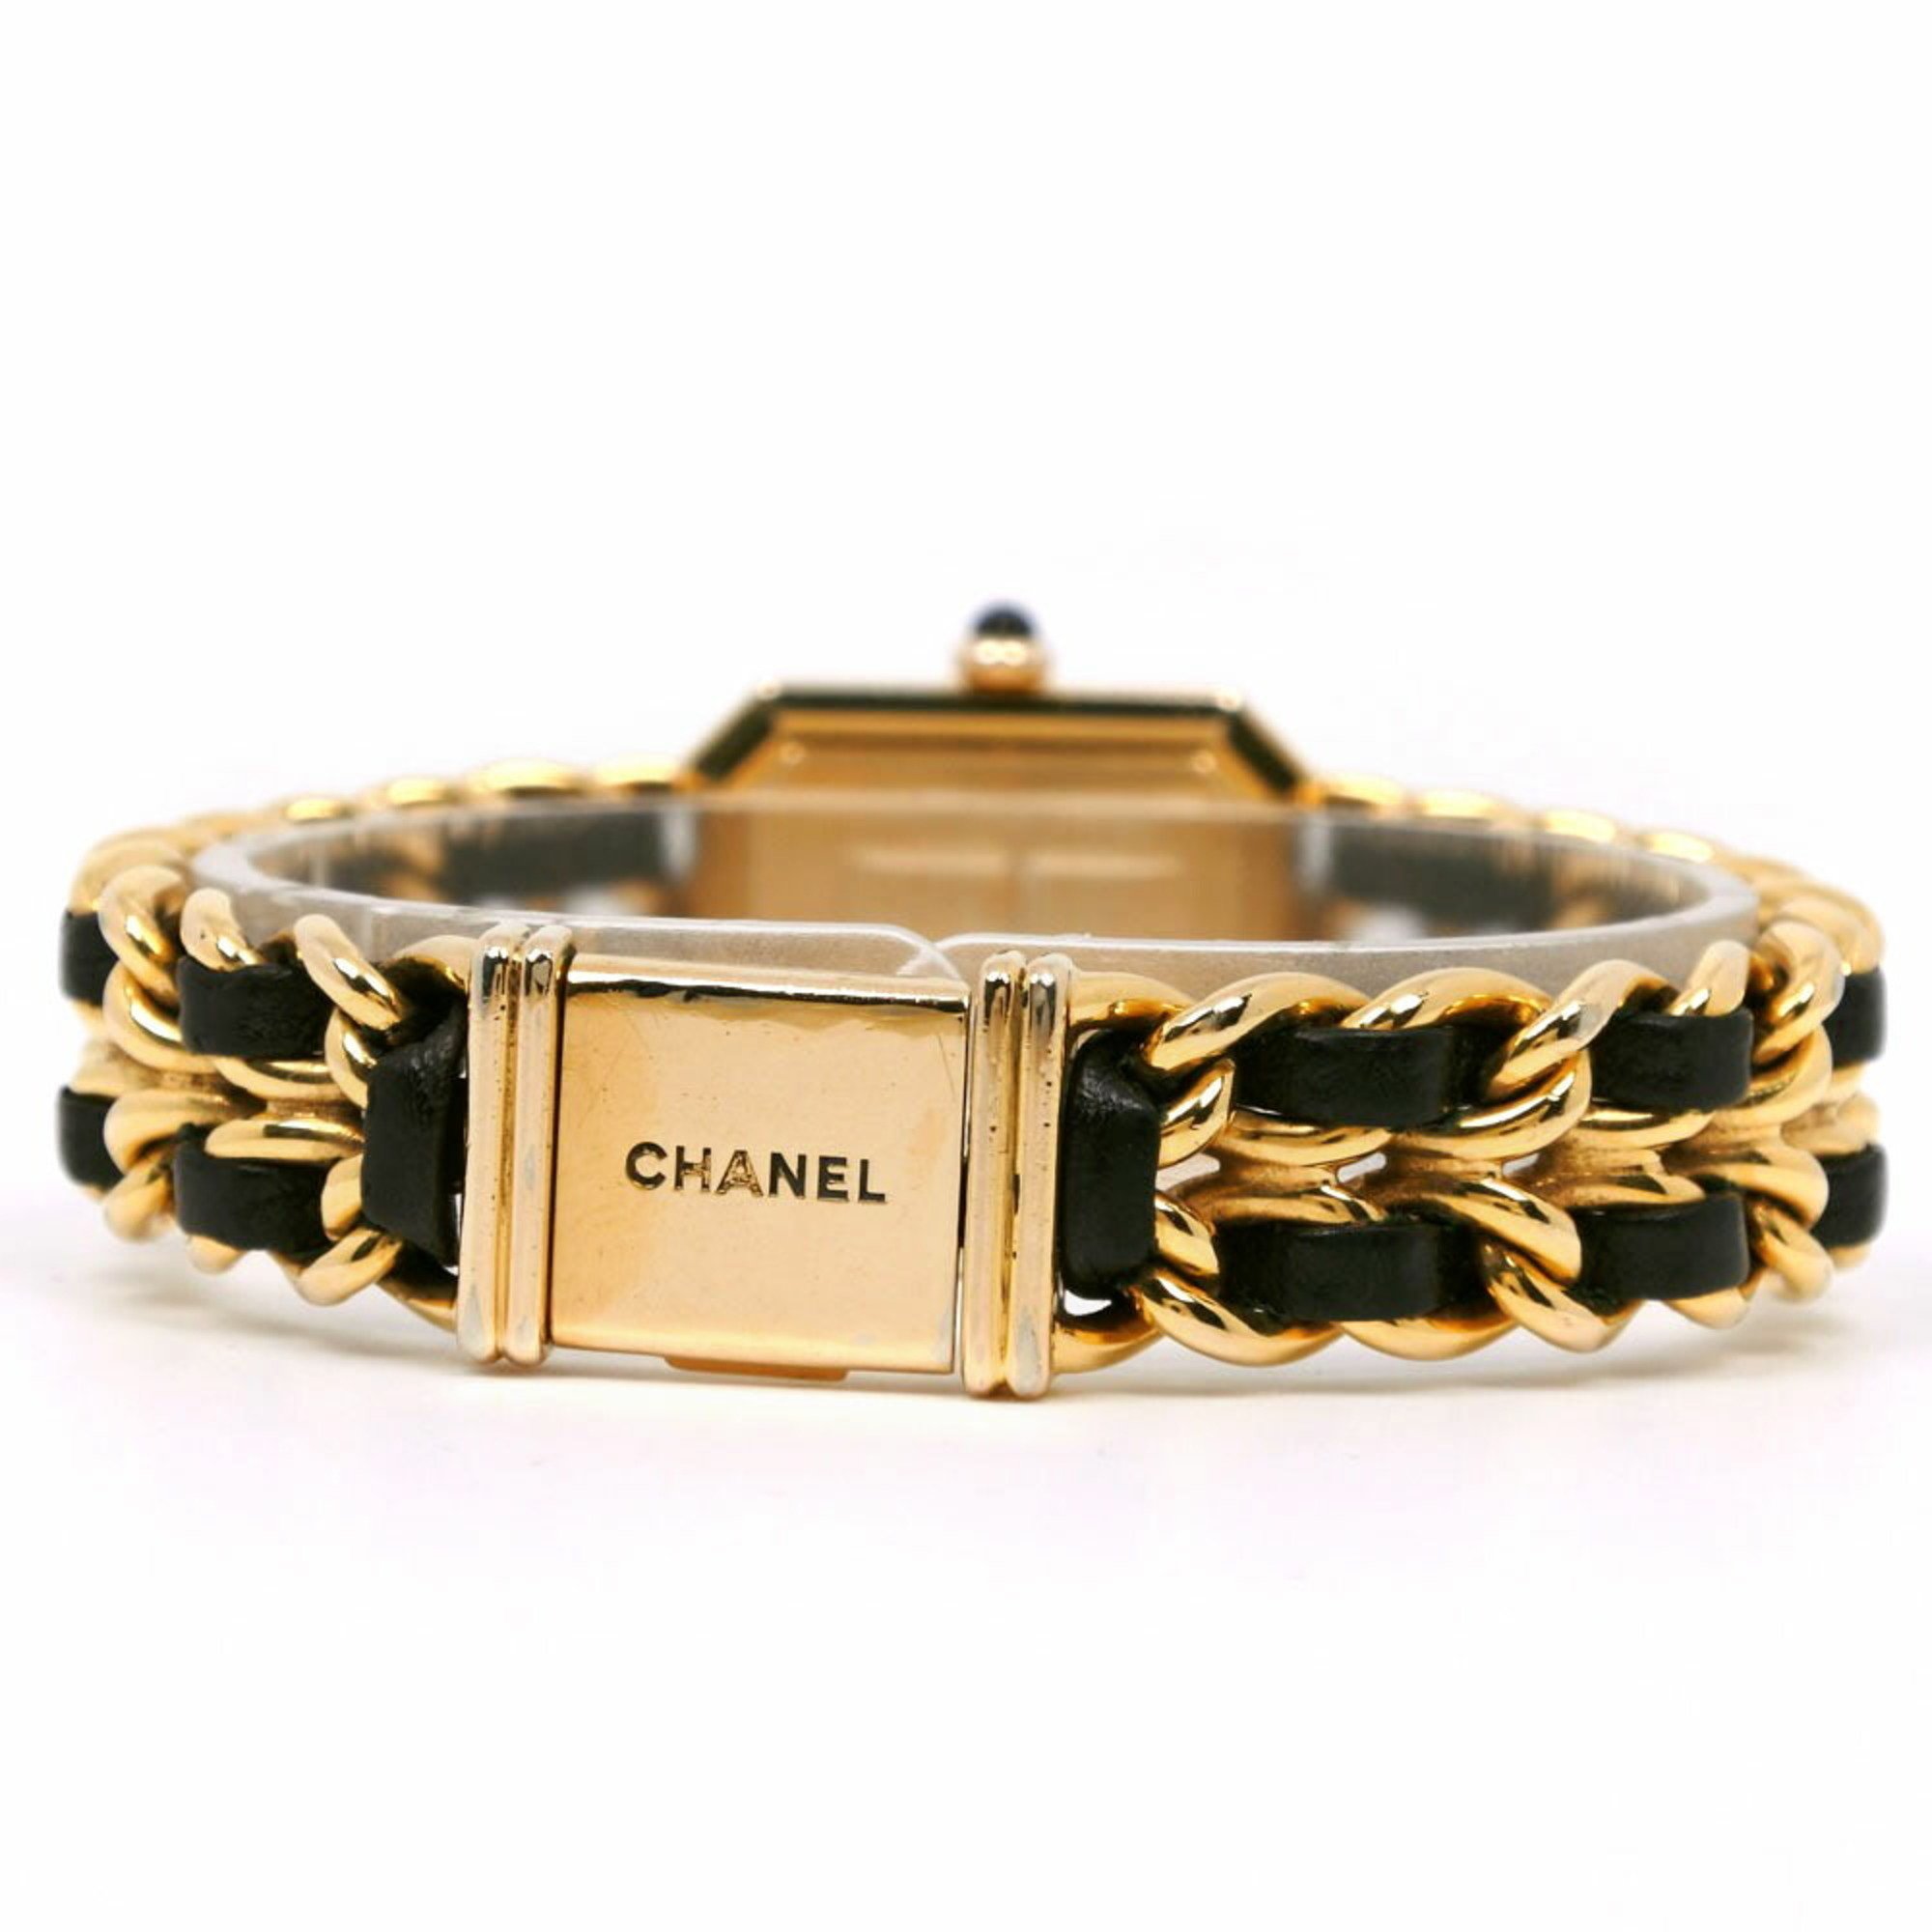 CHANEL Premiere L Watch H0001 Gold Plated x Leather Swiss Made Black/Gold Quartz Analog Display Black Dial Ladies